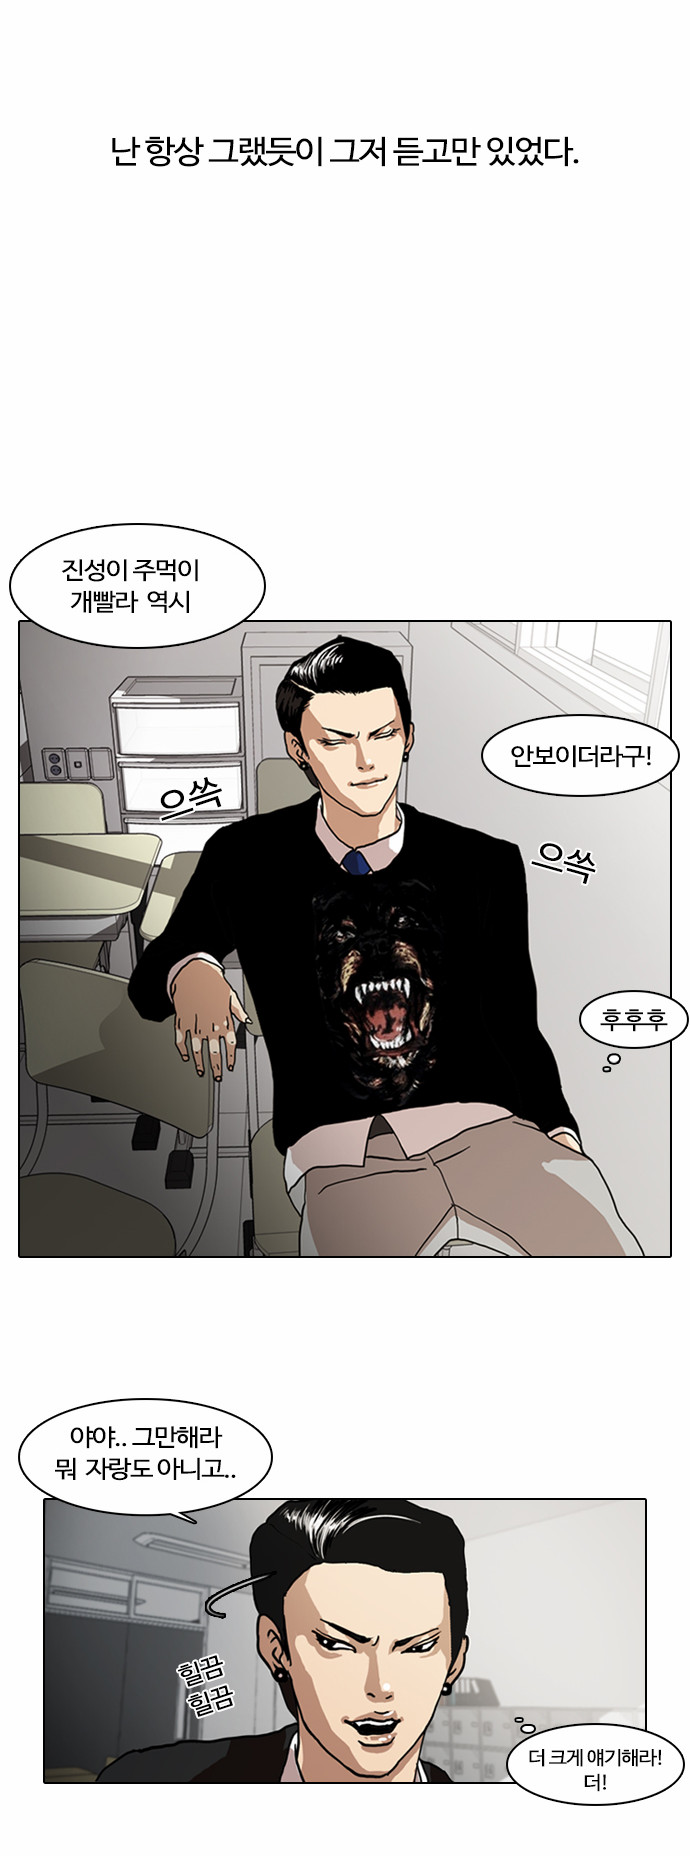 Lookism - Chapter 6 - Page 2